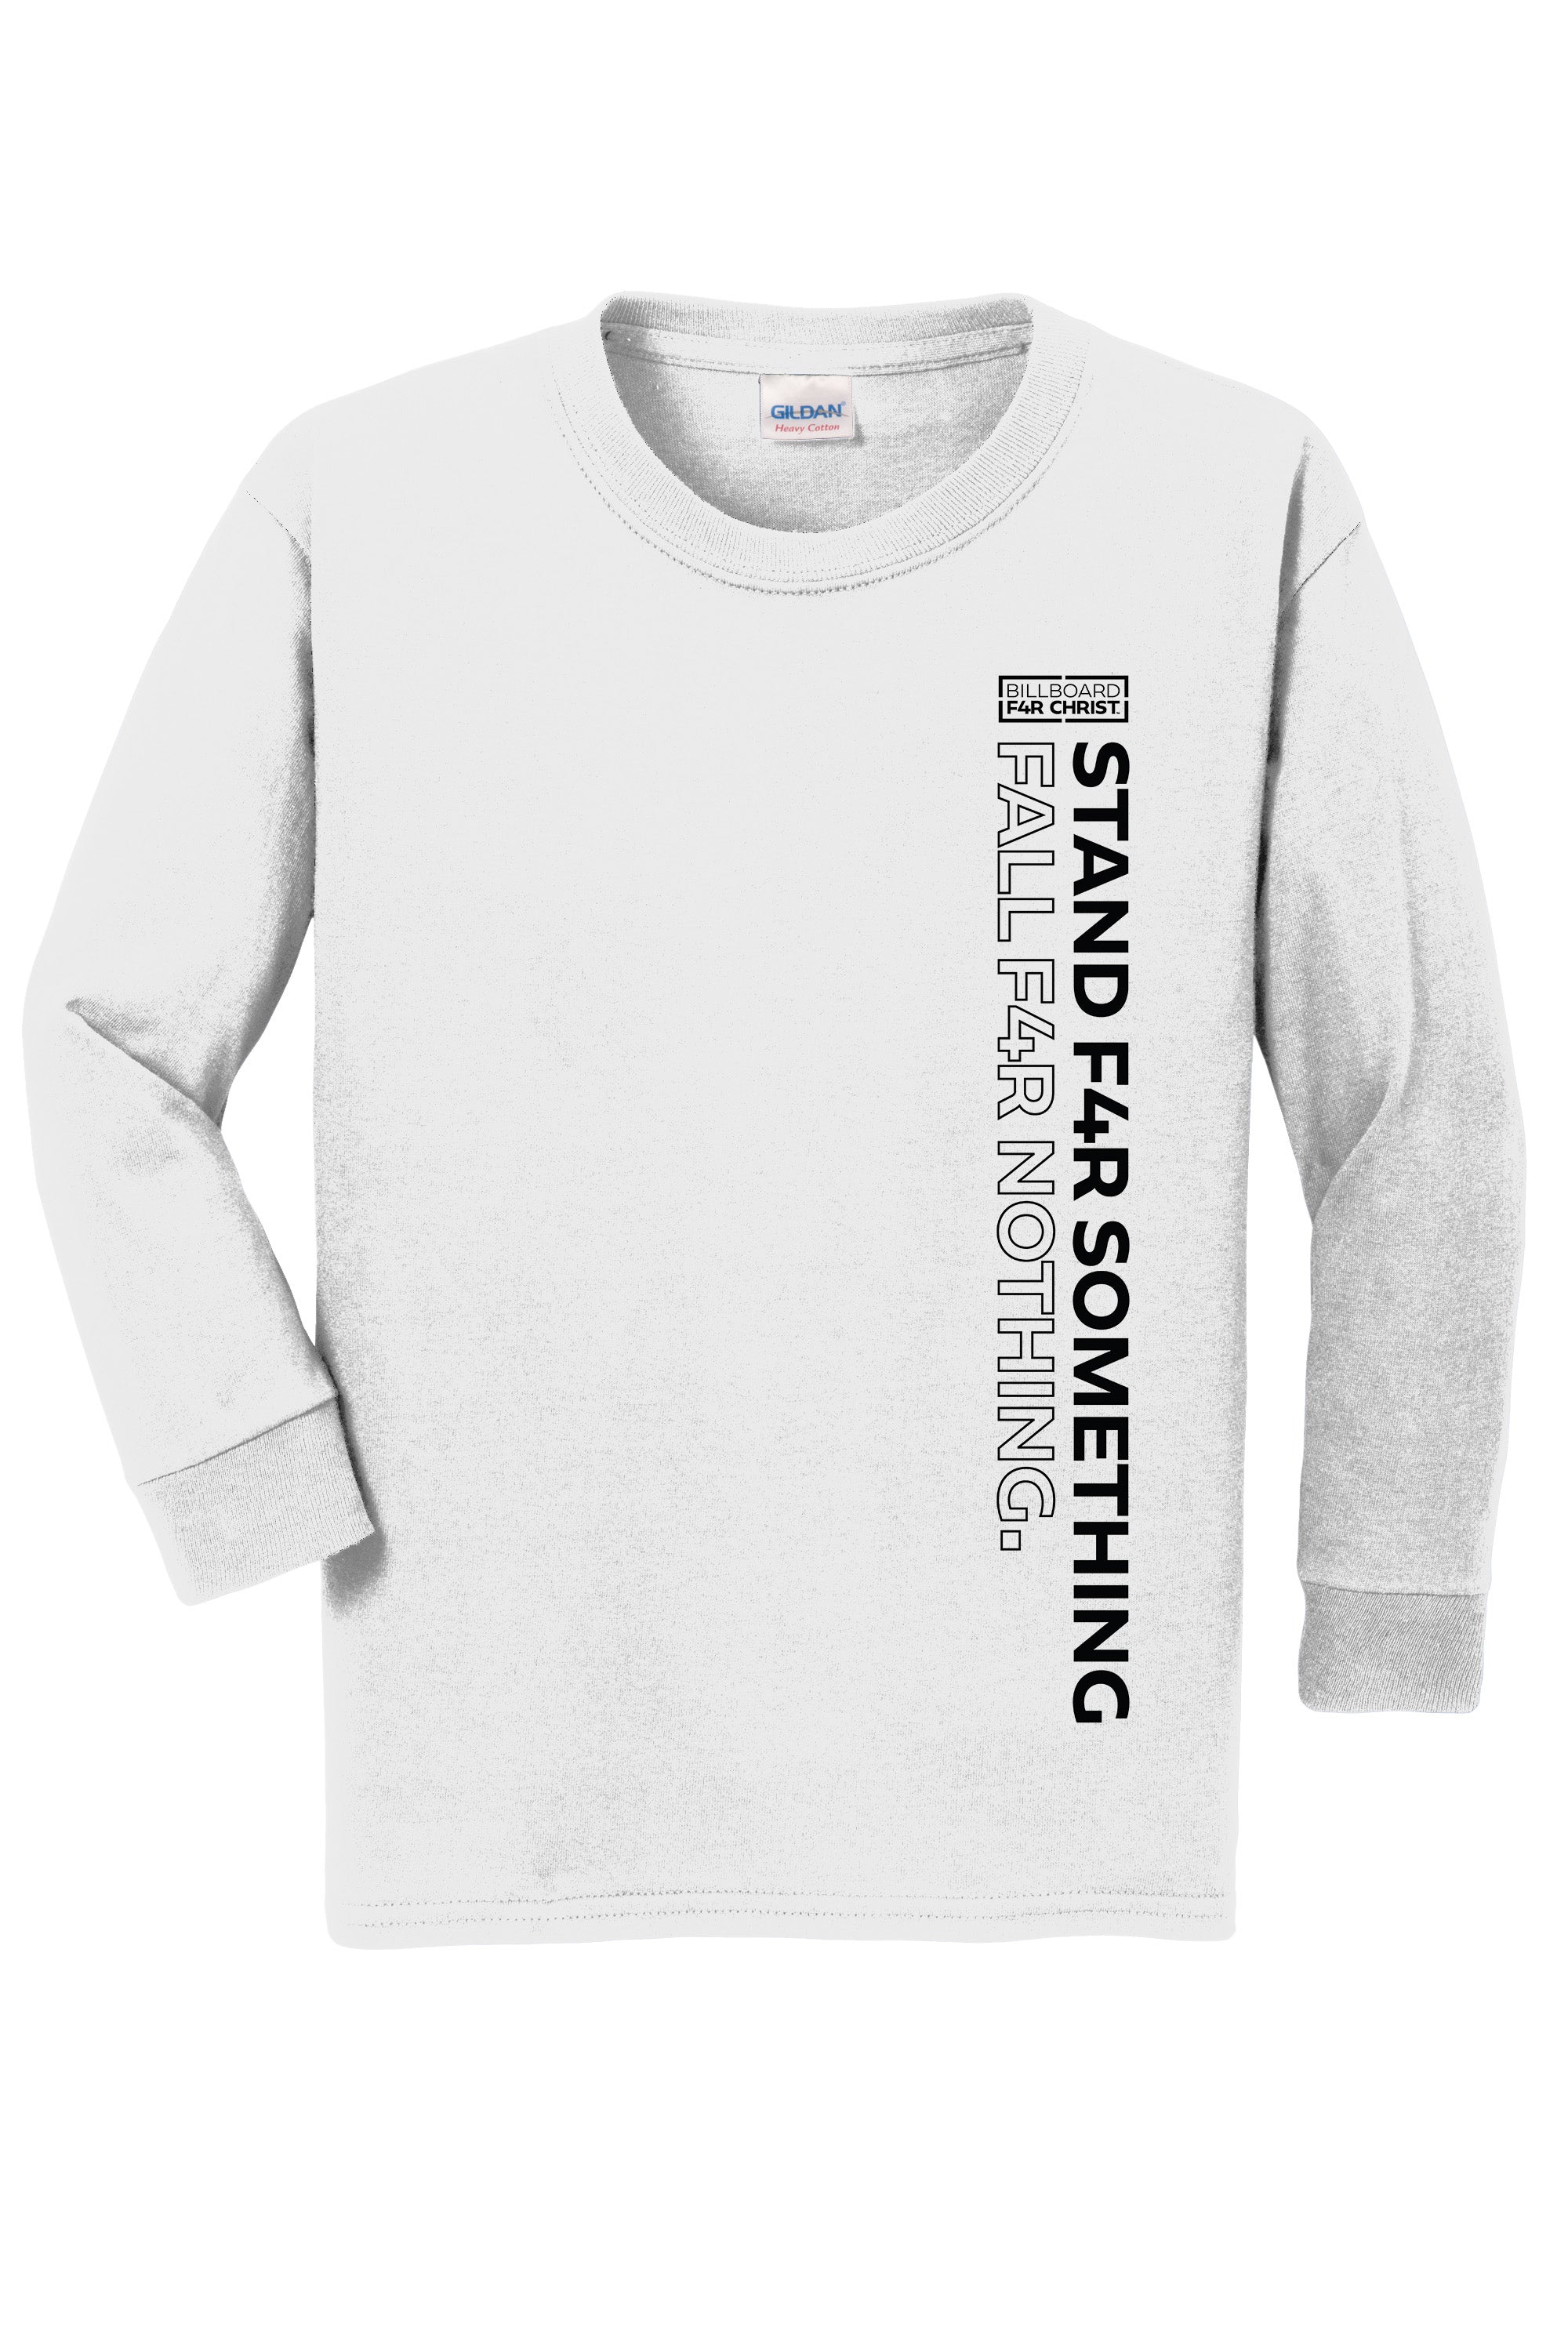 Stand F4R Something Youth Long Sleeve